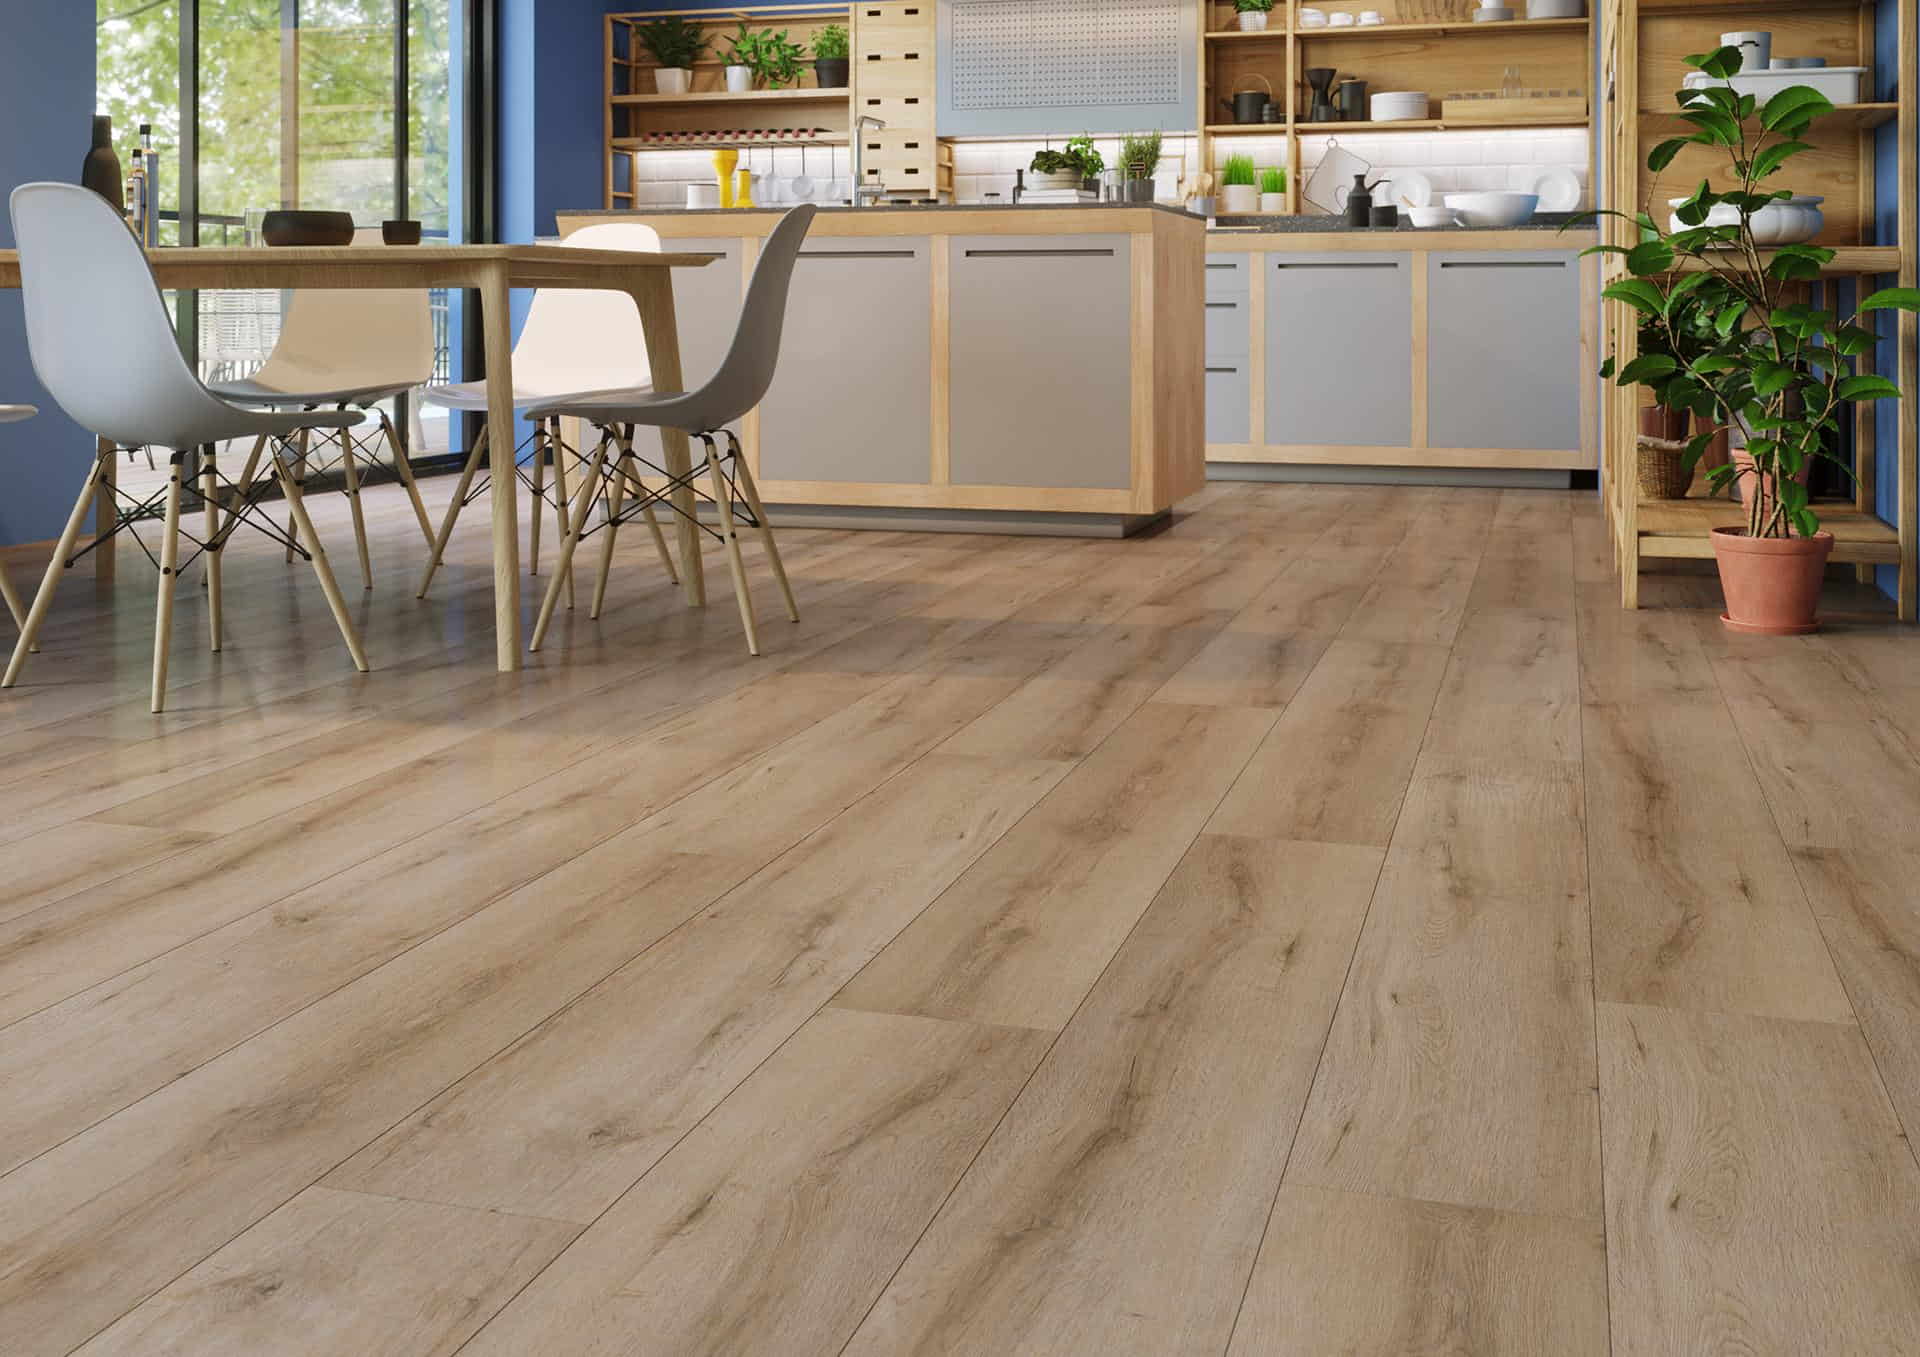 Best Flooring Options For High-traffic Areas